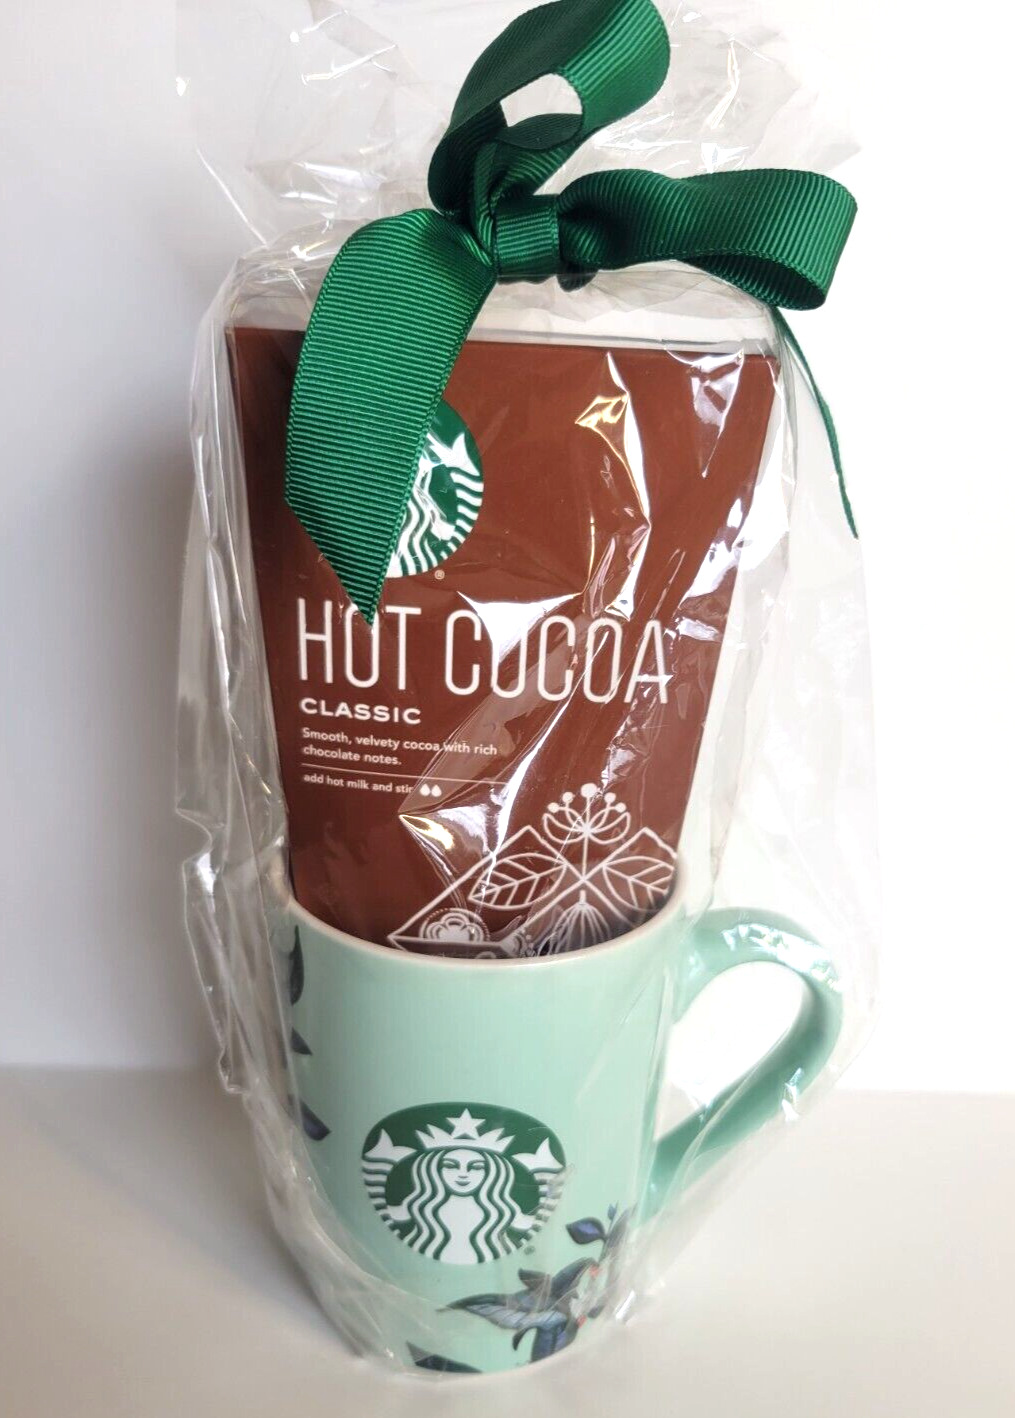 Starbucks 10 Oz Coffee Mug Gift Set Cup With Classic Hot Cocoa Mix NEW